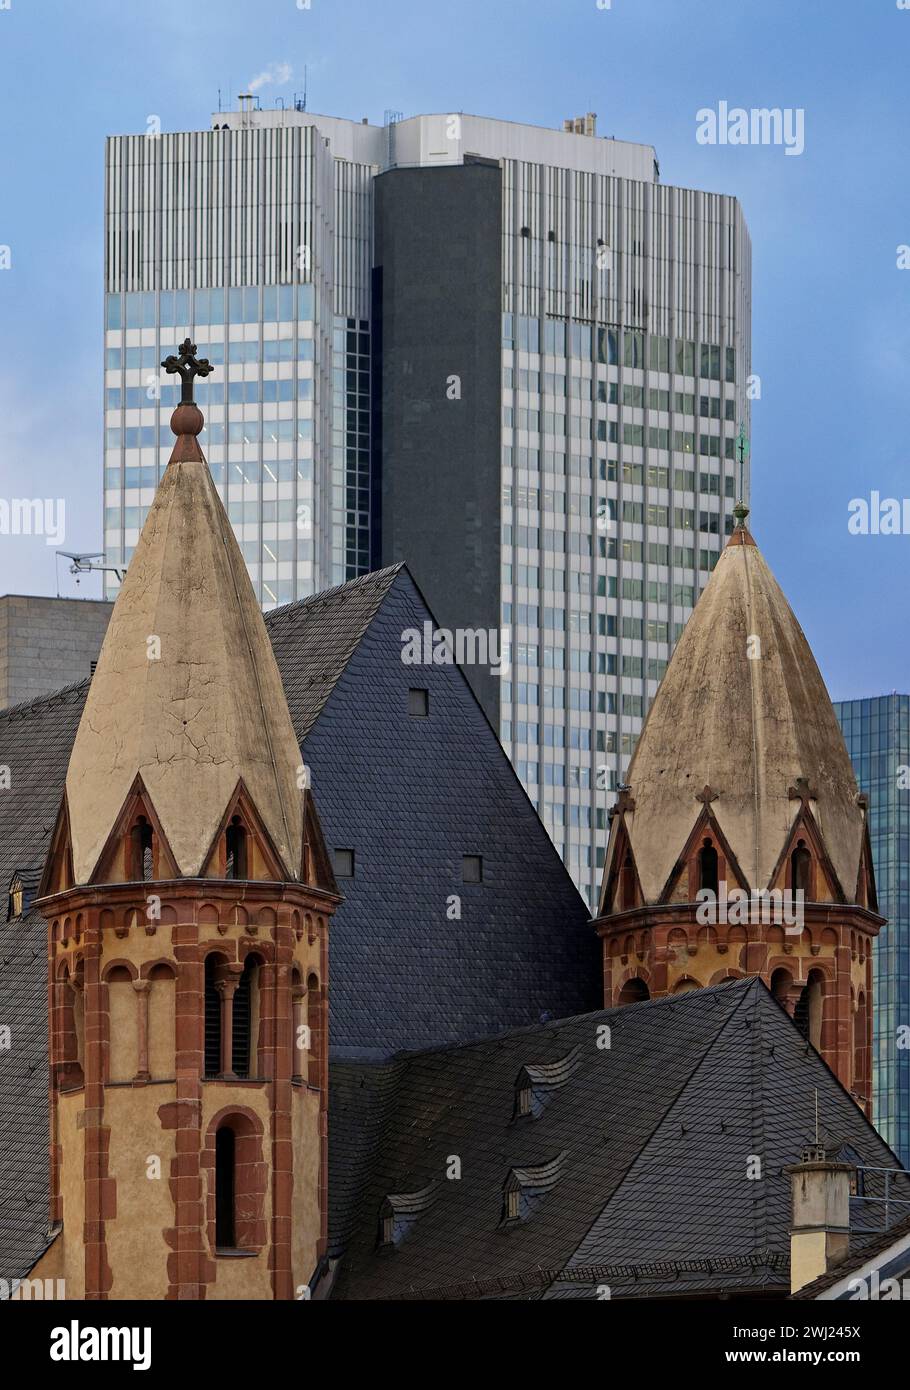 Old St. Leonhard Church in front of modern high-rise buildings, Frankfurt am Main, Germany, Europe Stock Photo